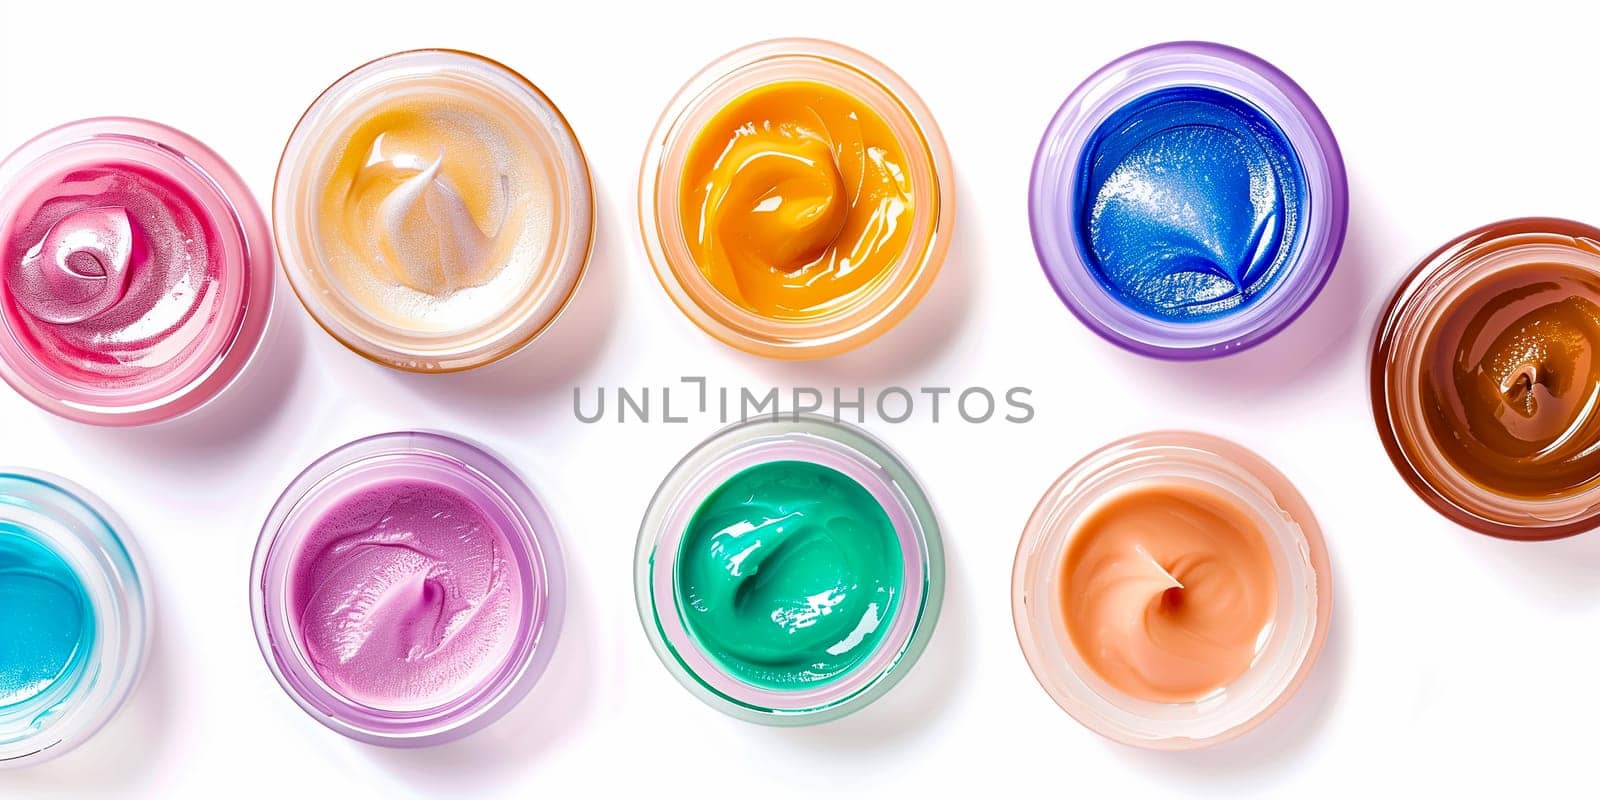 Multicolored cream eyeshadows in jars on white background, close up.